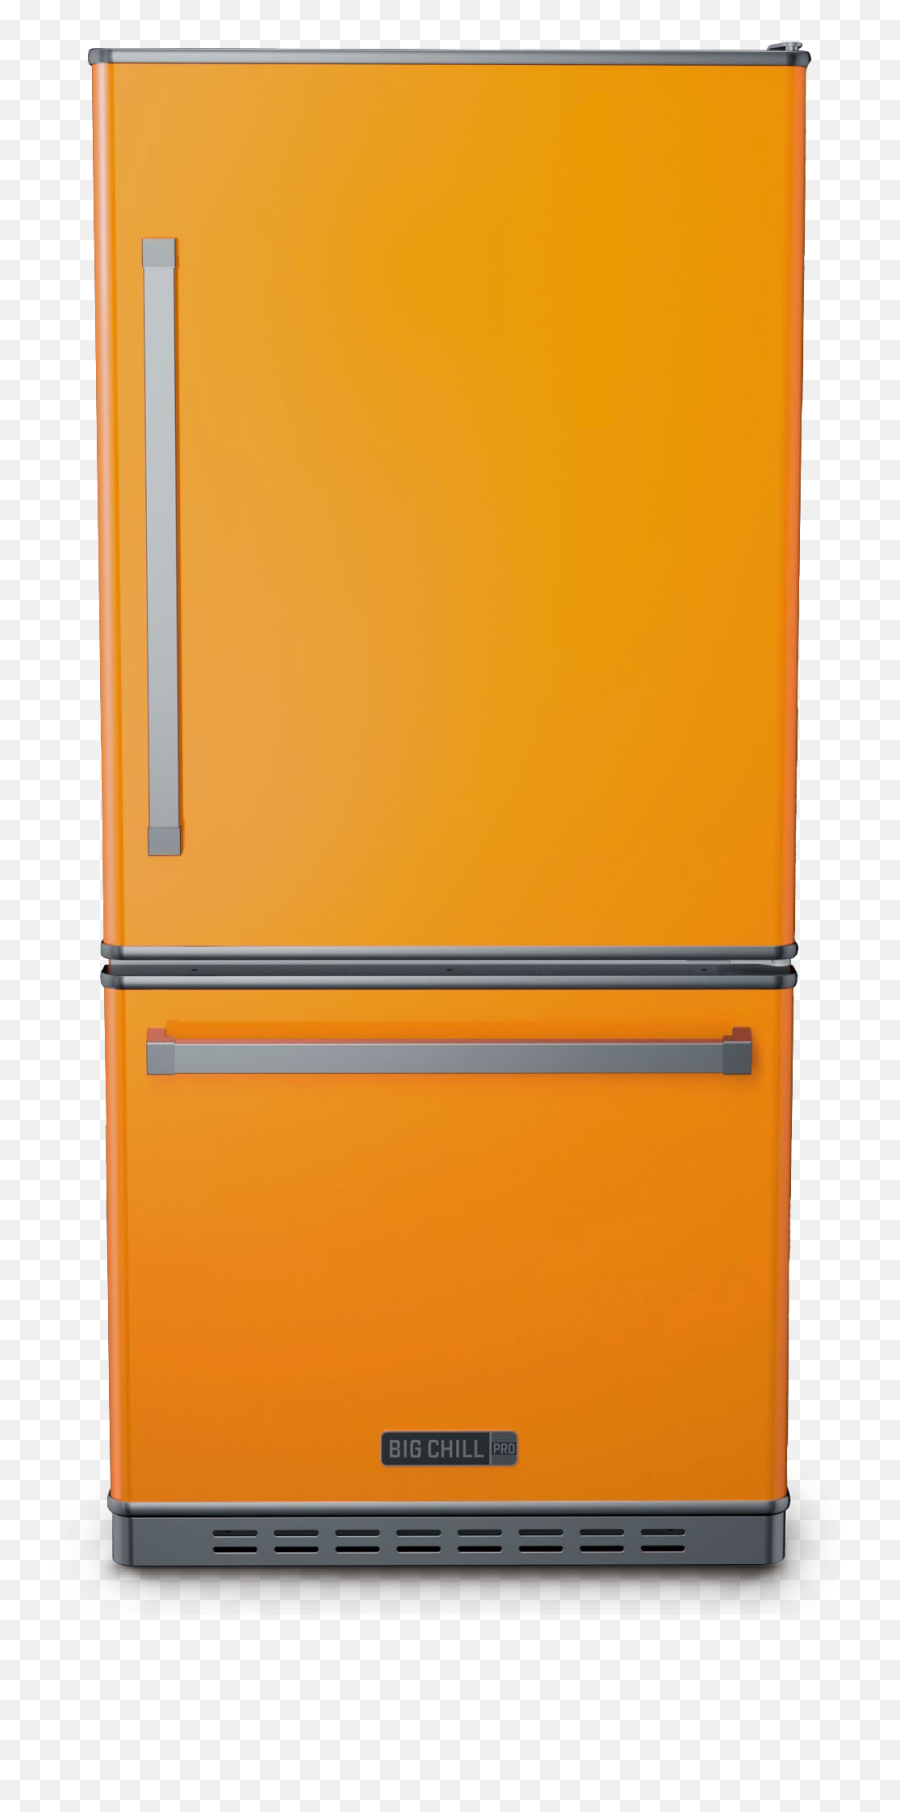 Download Refrigerator Png Image For Free - Yellow Fridge Cartoon, Refrigerator Png - free transparent png images 